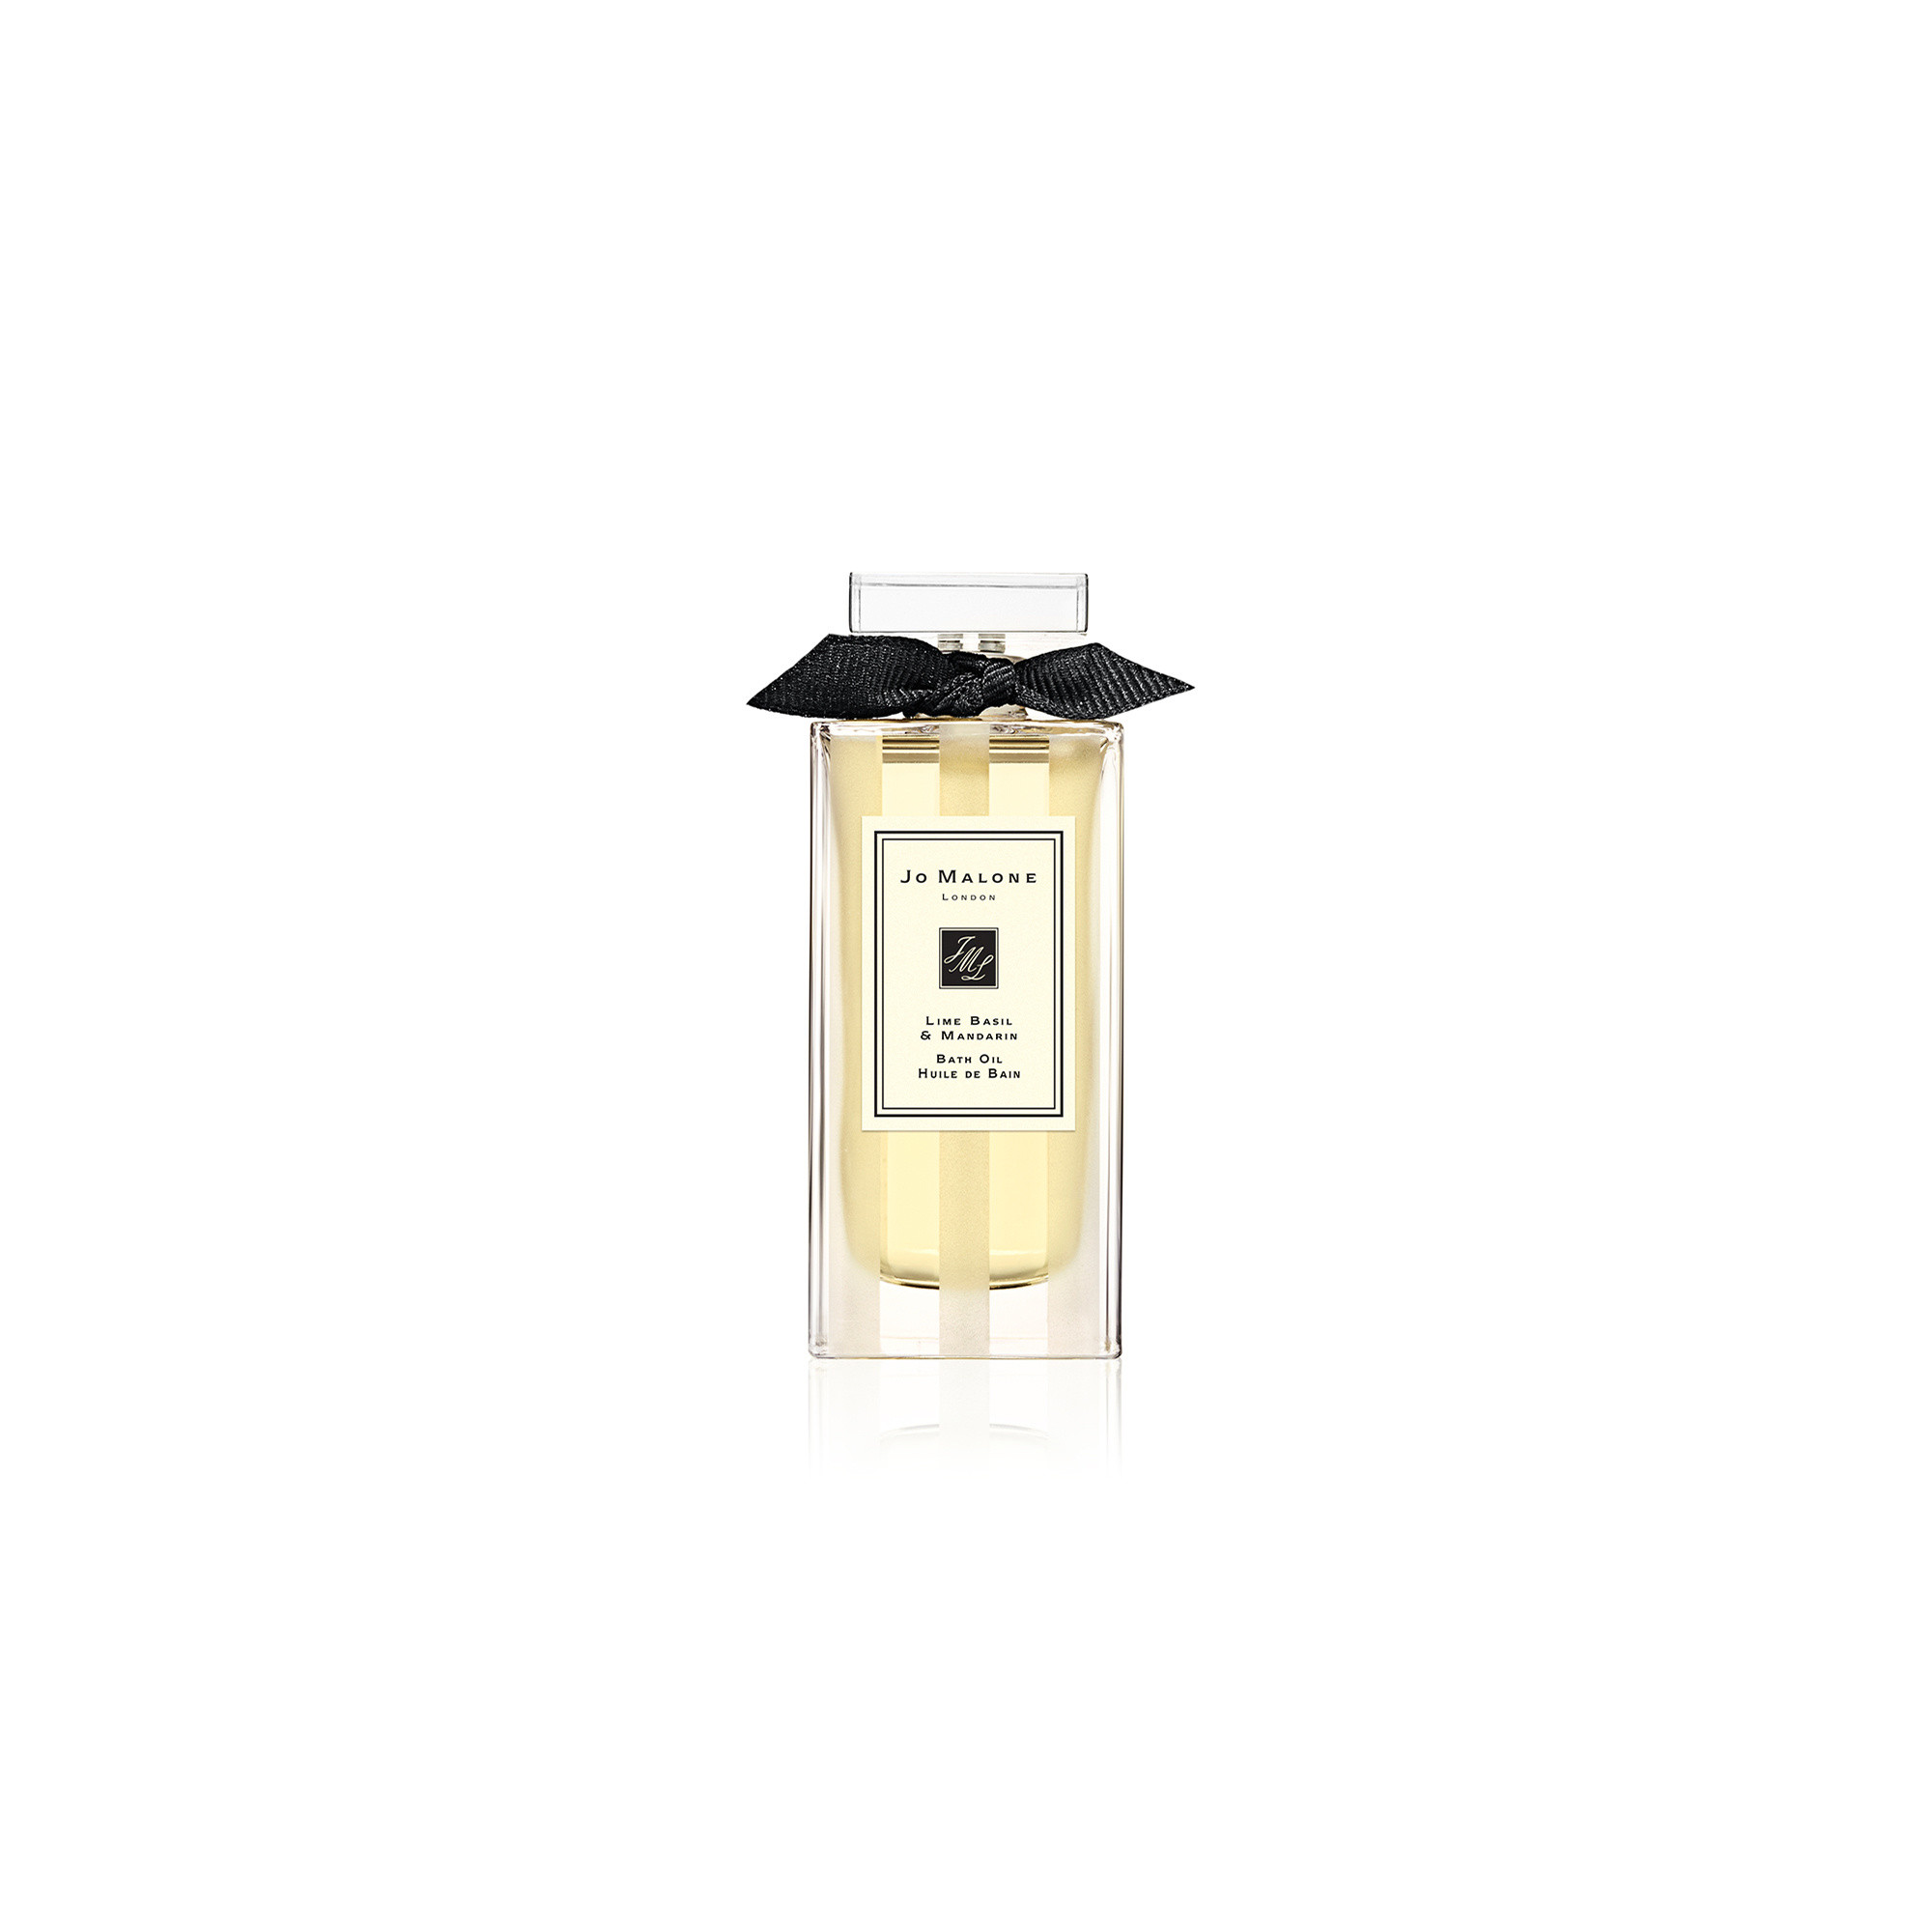 Jo Malone London red roses bath oil 30 ml, Beige, large image number 0